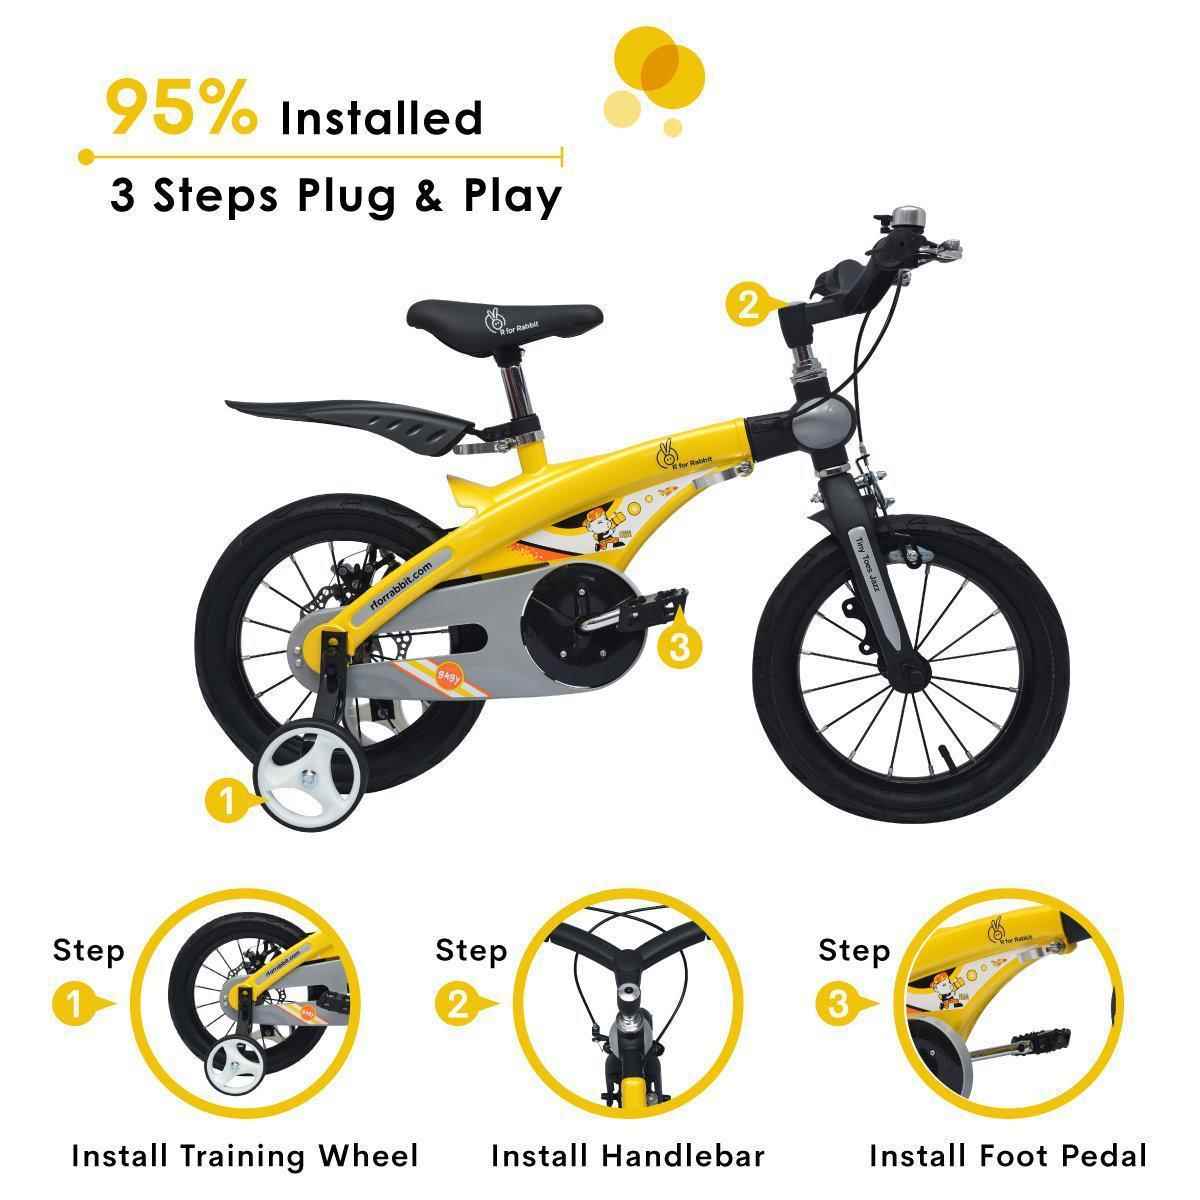 R FOR RABBIT Tiny Toes Jazz Bicycle- Smart Plug and Play Cycle for Kids for 4 Years to 7 Years(16 inch/T)